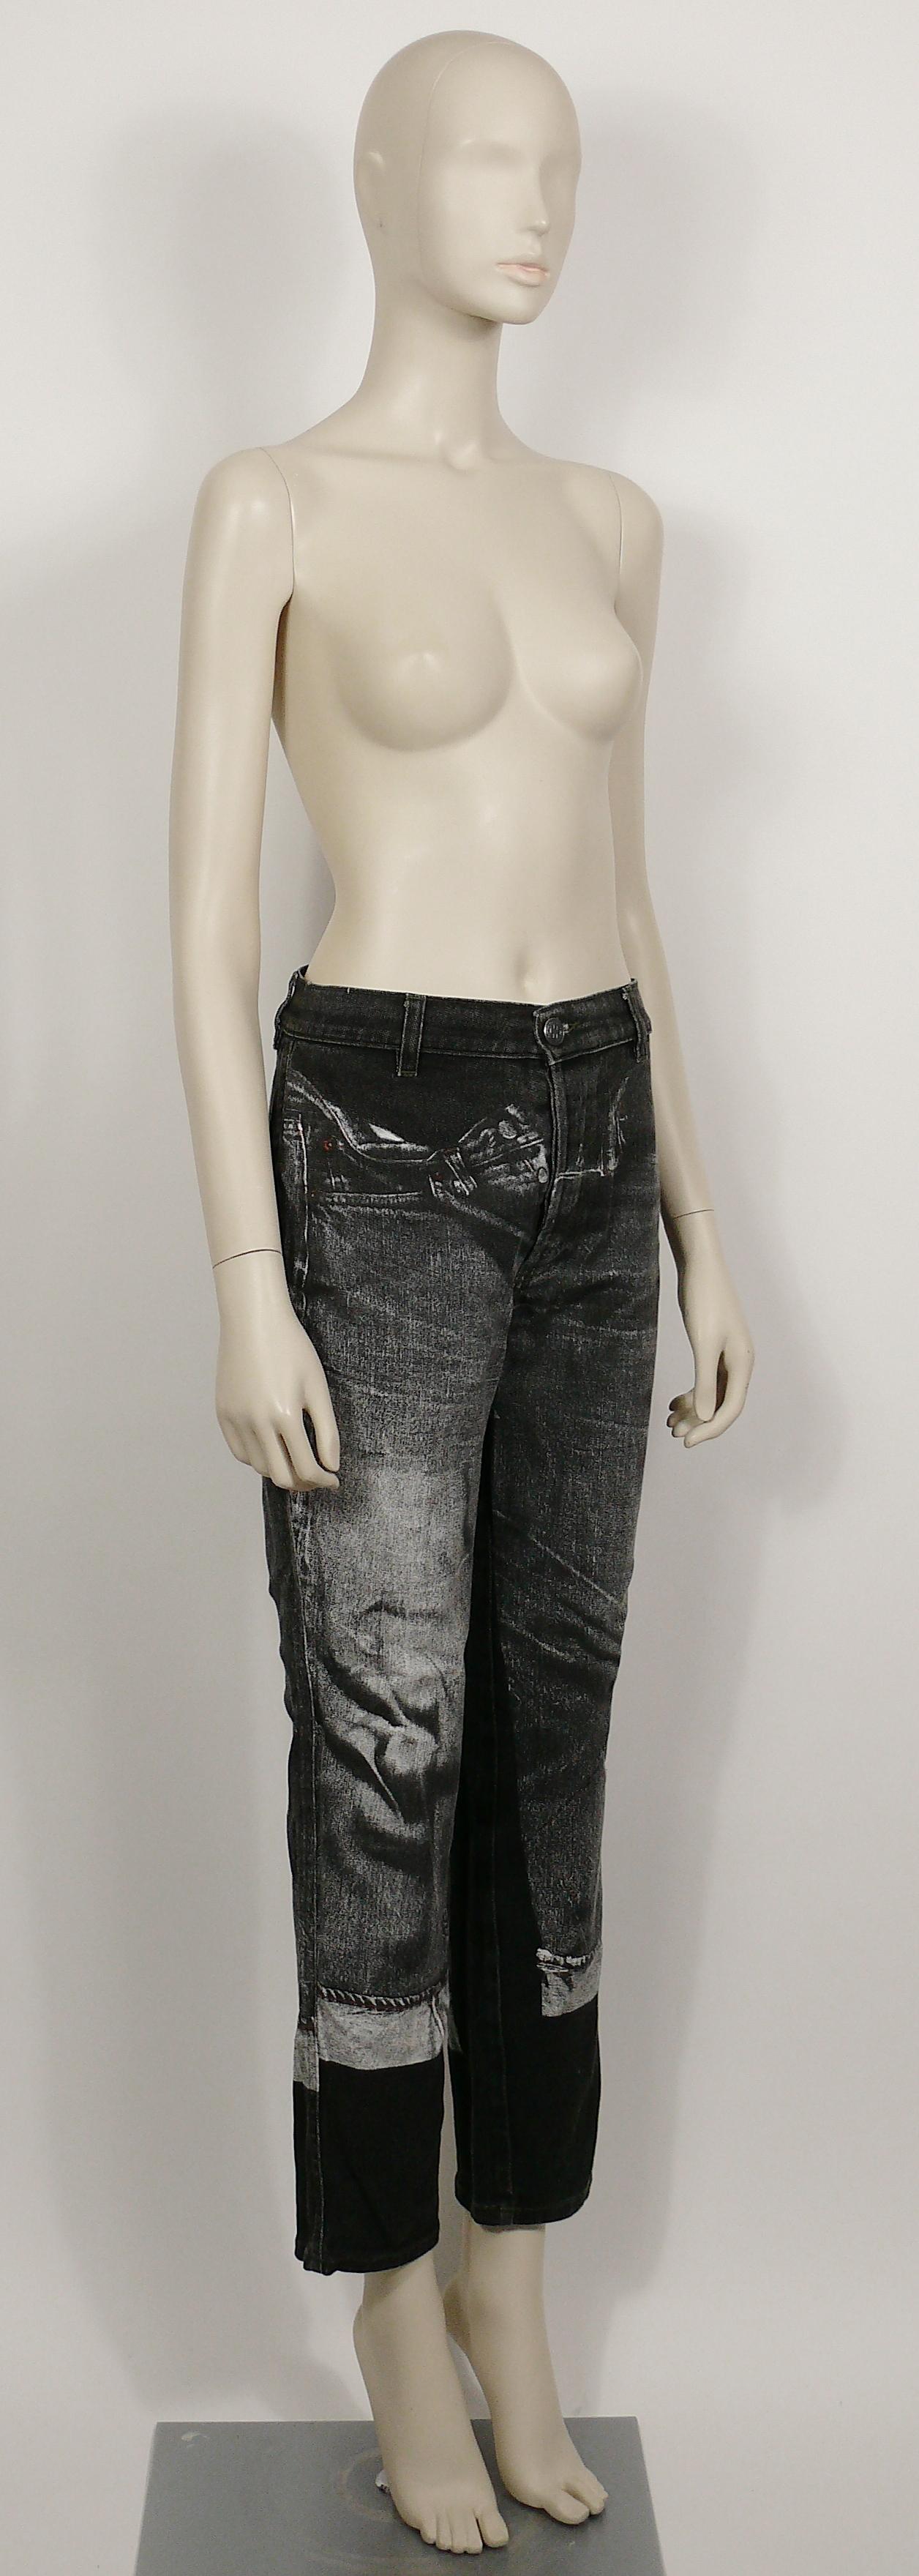 JEAN PAUL GAULTIER vintage denim pants trousers featuring an x-ray screen trompe l’œil jeans on front and back.

These trousers feature :
- Distressed black denim jeans featuring x-ray screen trompe l’œil jeans on front and back.
- Front down